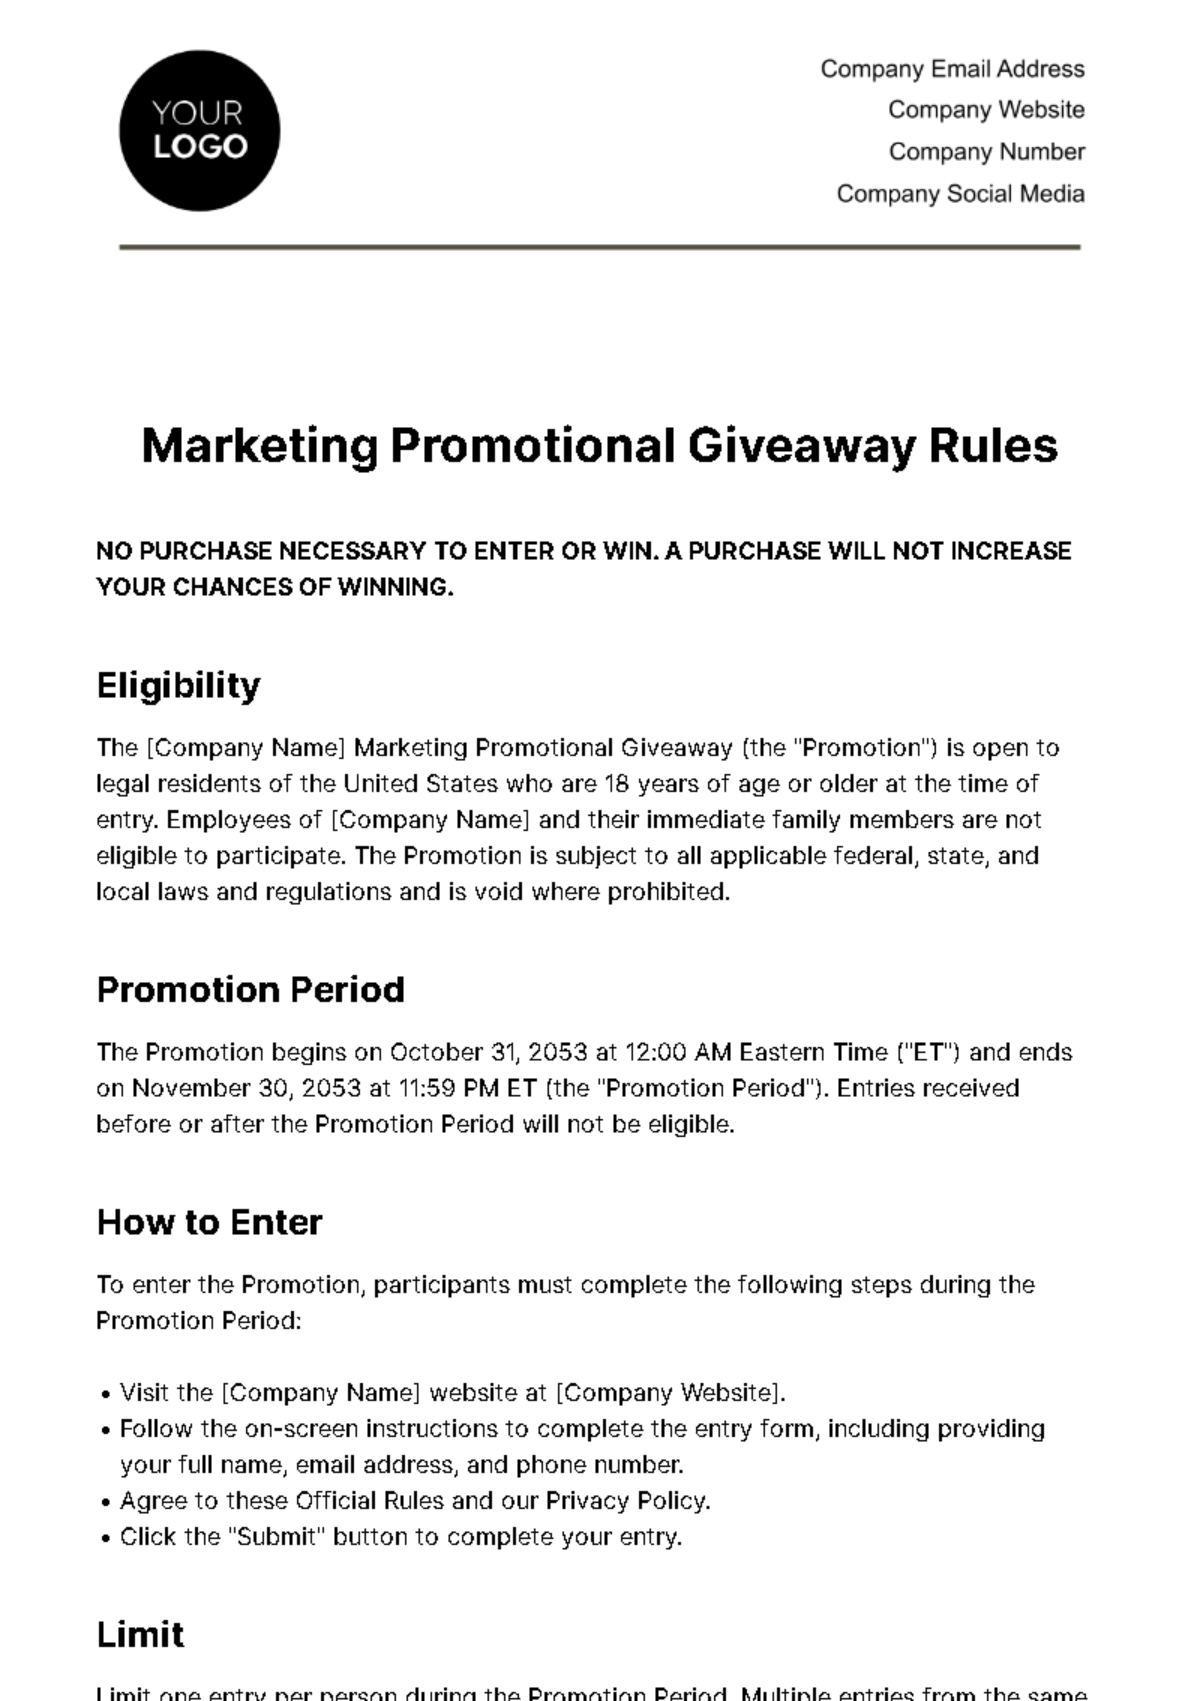 Free Marketing Promotional Giveaway Rules Template